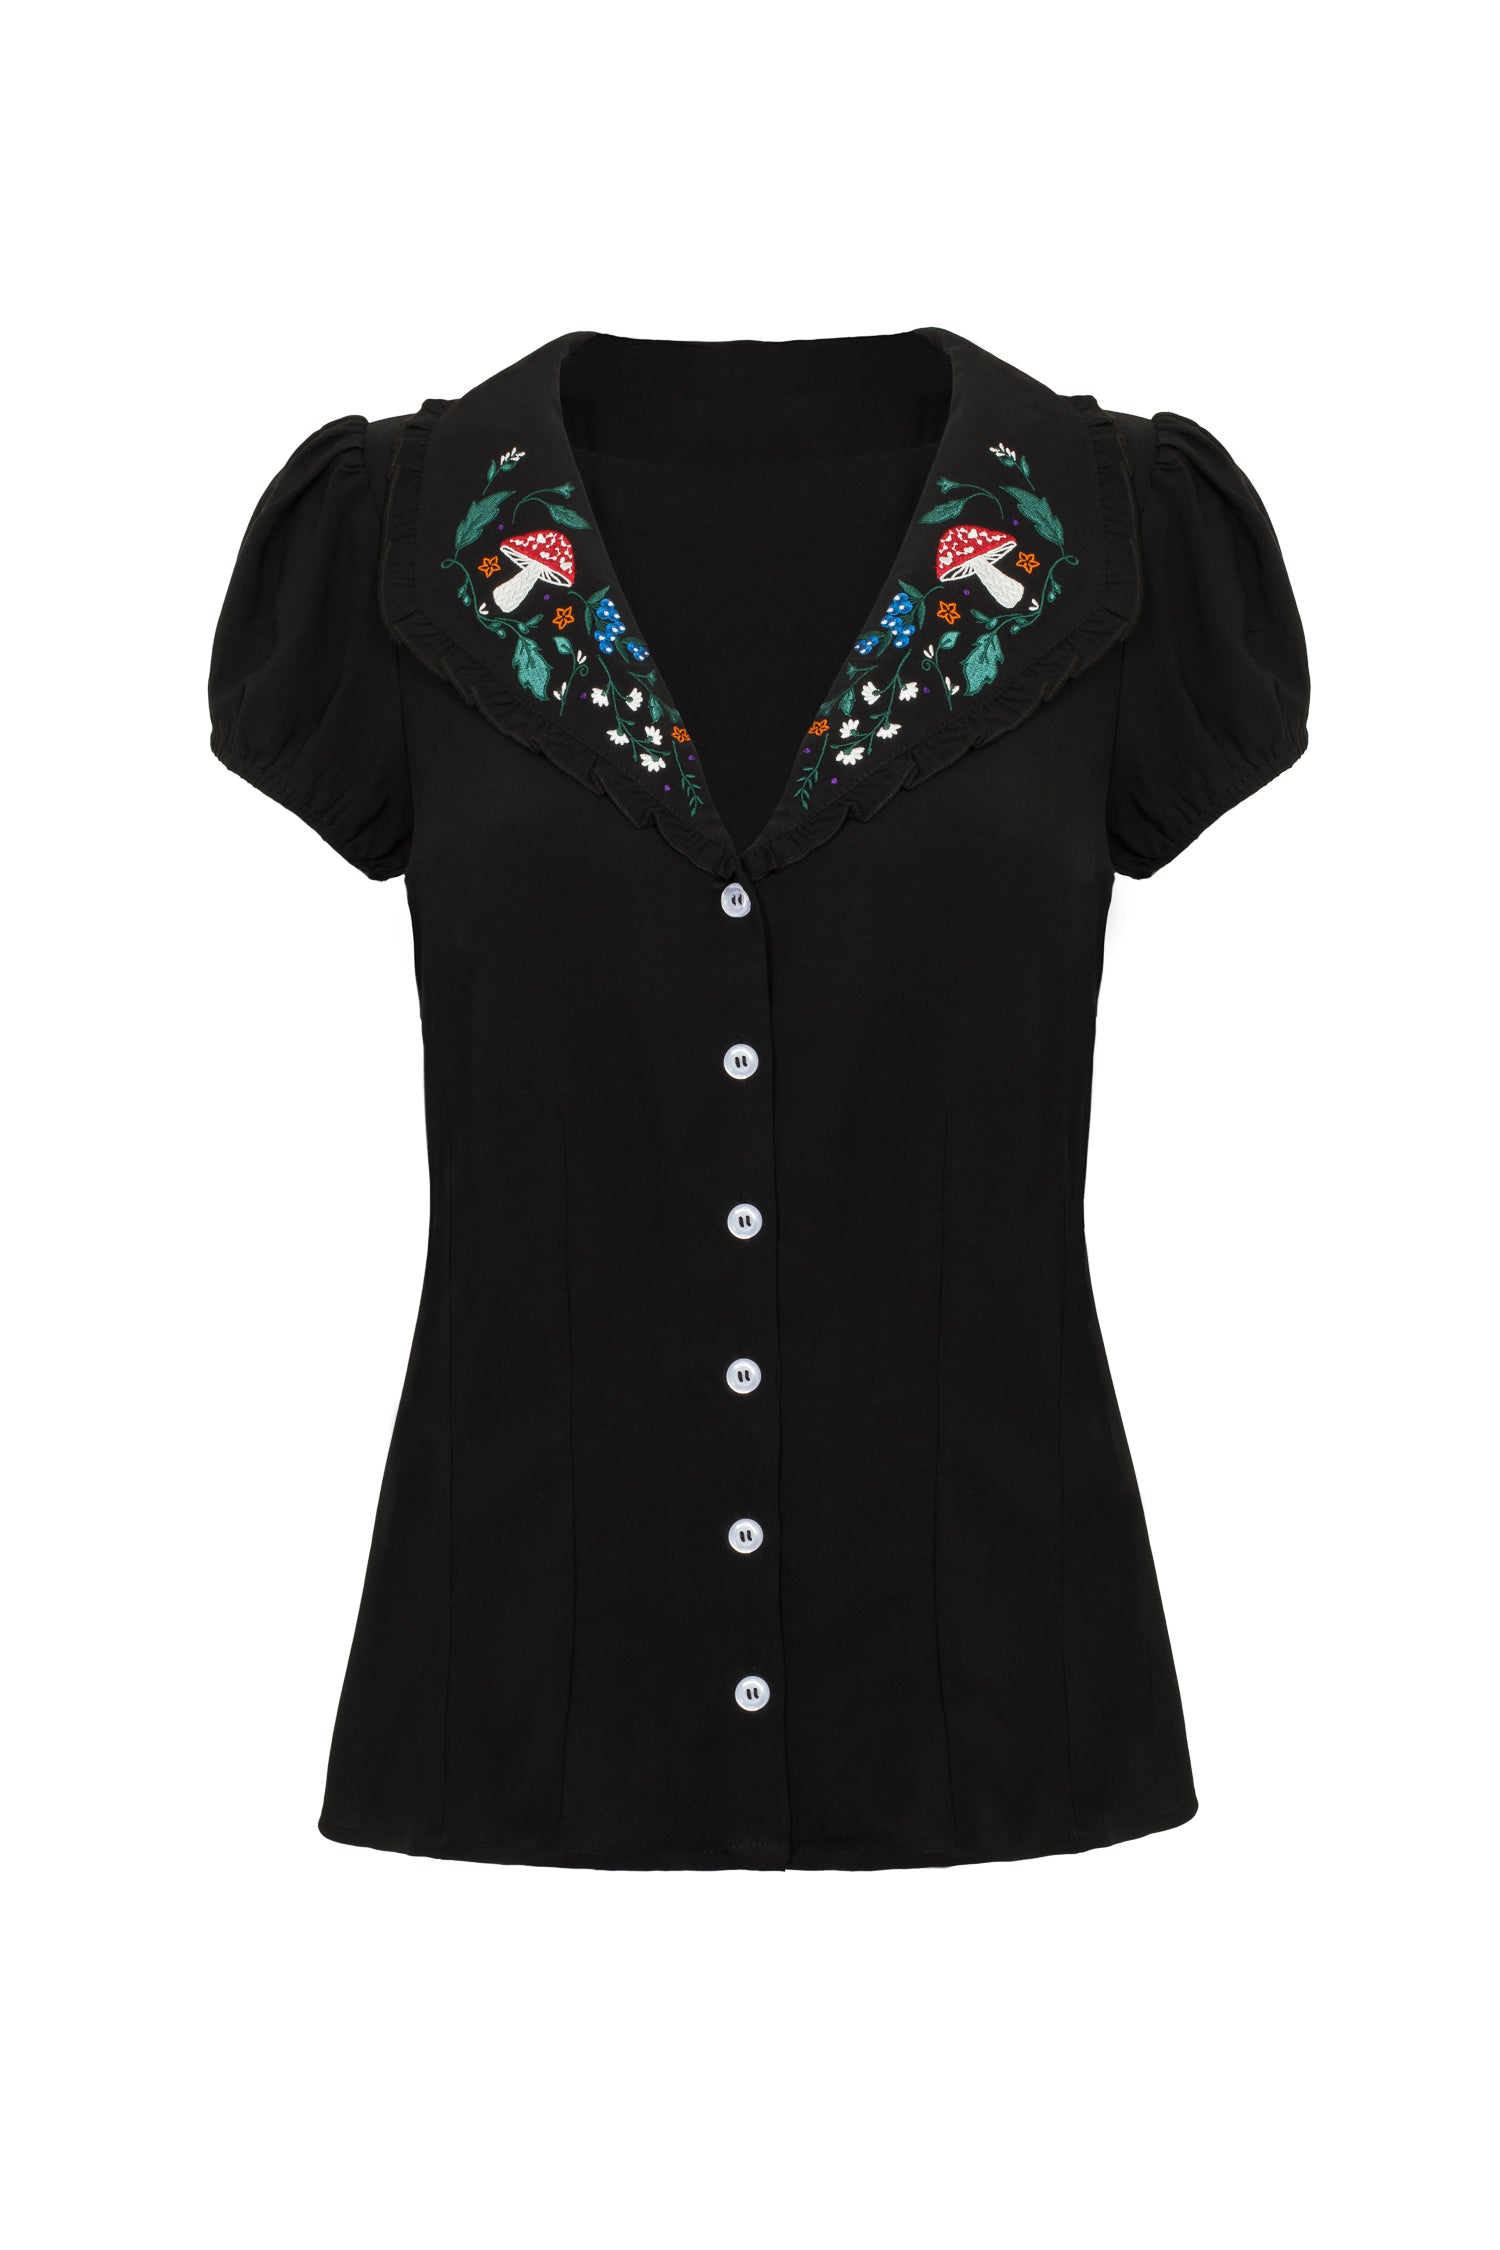 Black semi fitted blouse with embroidered collar and button front on a plain white background